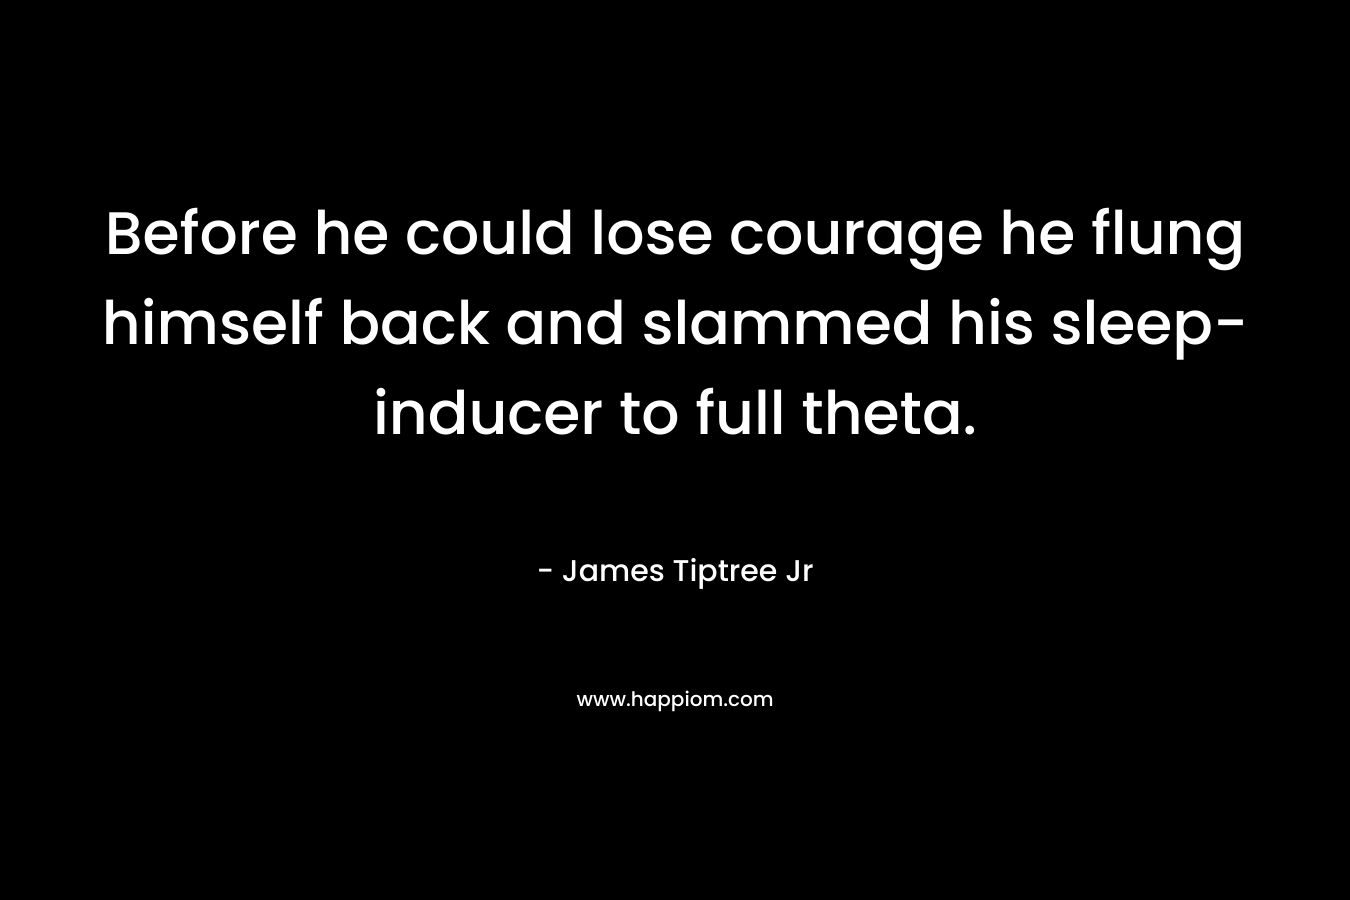 Before he could lose courage he flung himself back and slammed his sleep-inducer to full theta. – James Tiptree Jr